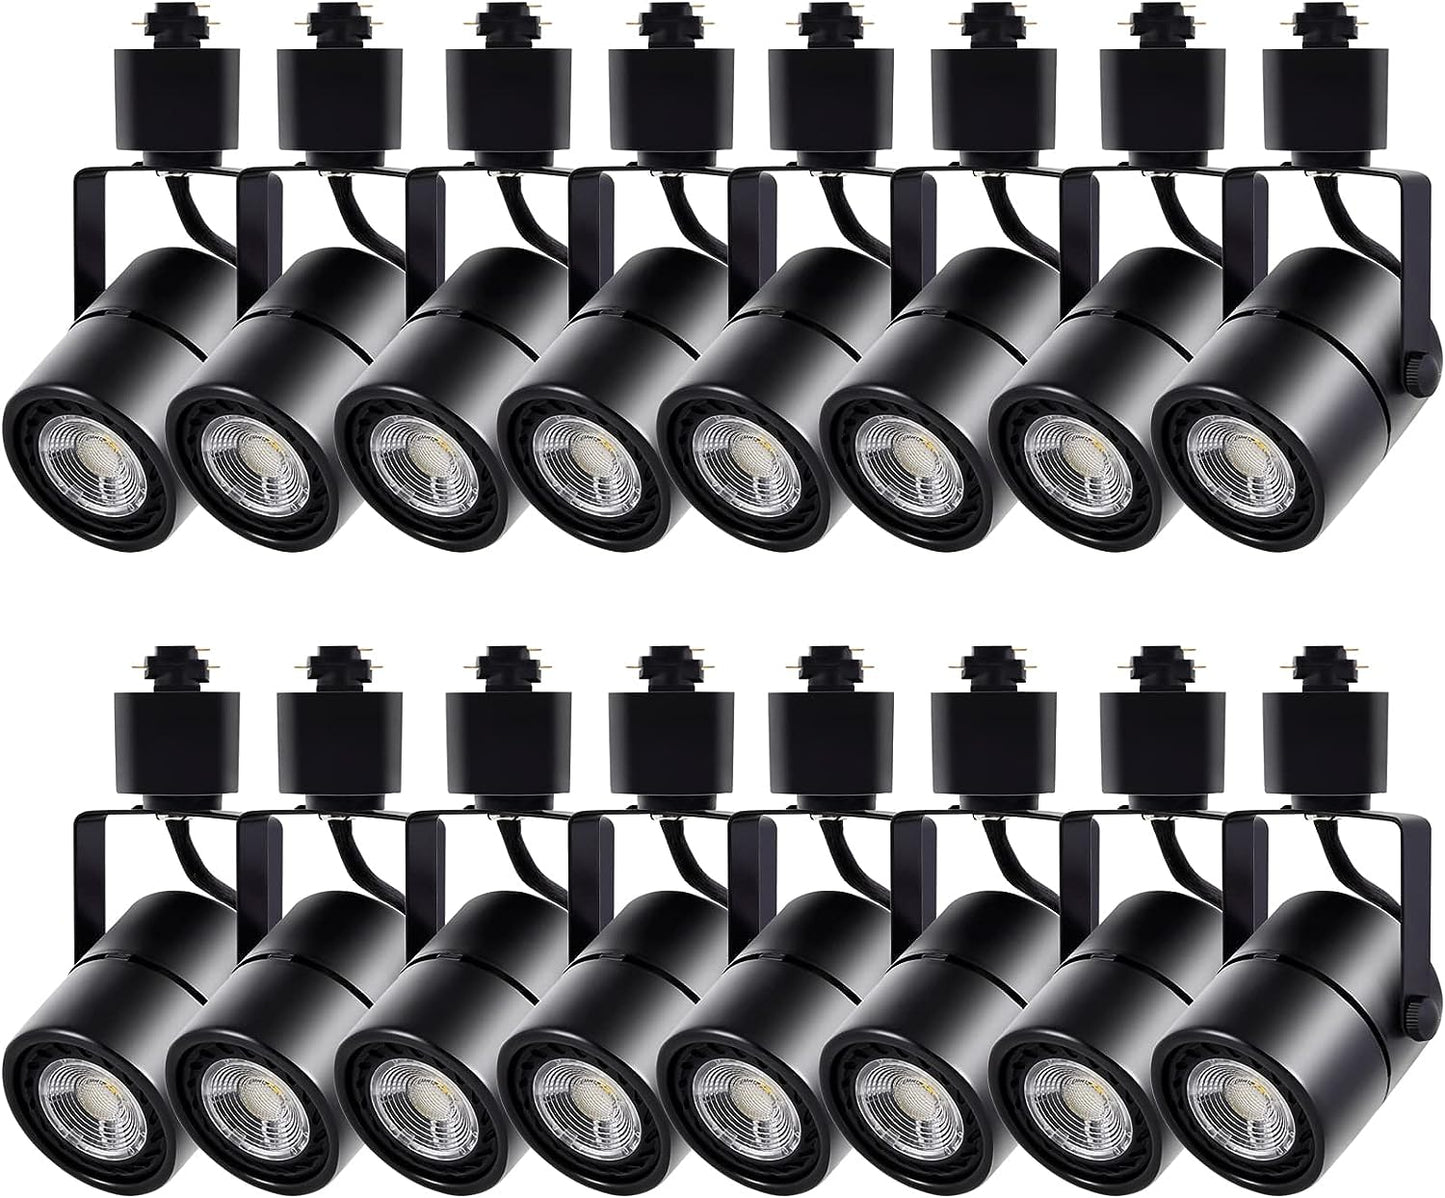 MOCAOIRE Track Lighting Heads, 10W 4000K Cool White Dimmable Bright LED Track Lighting Fixtures for Accent Retail Kitchen Artwork,120V Linear Track Light H Type-CRI90+ 24 White - 16 Pack (Black)